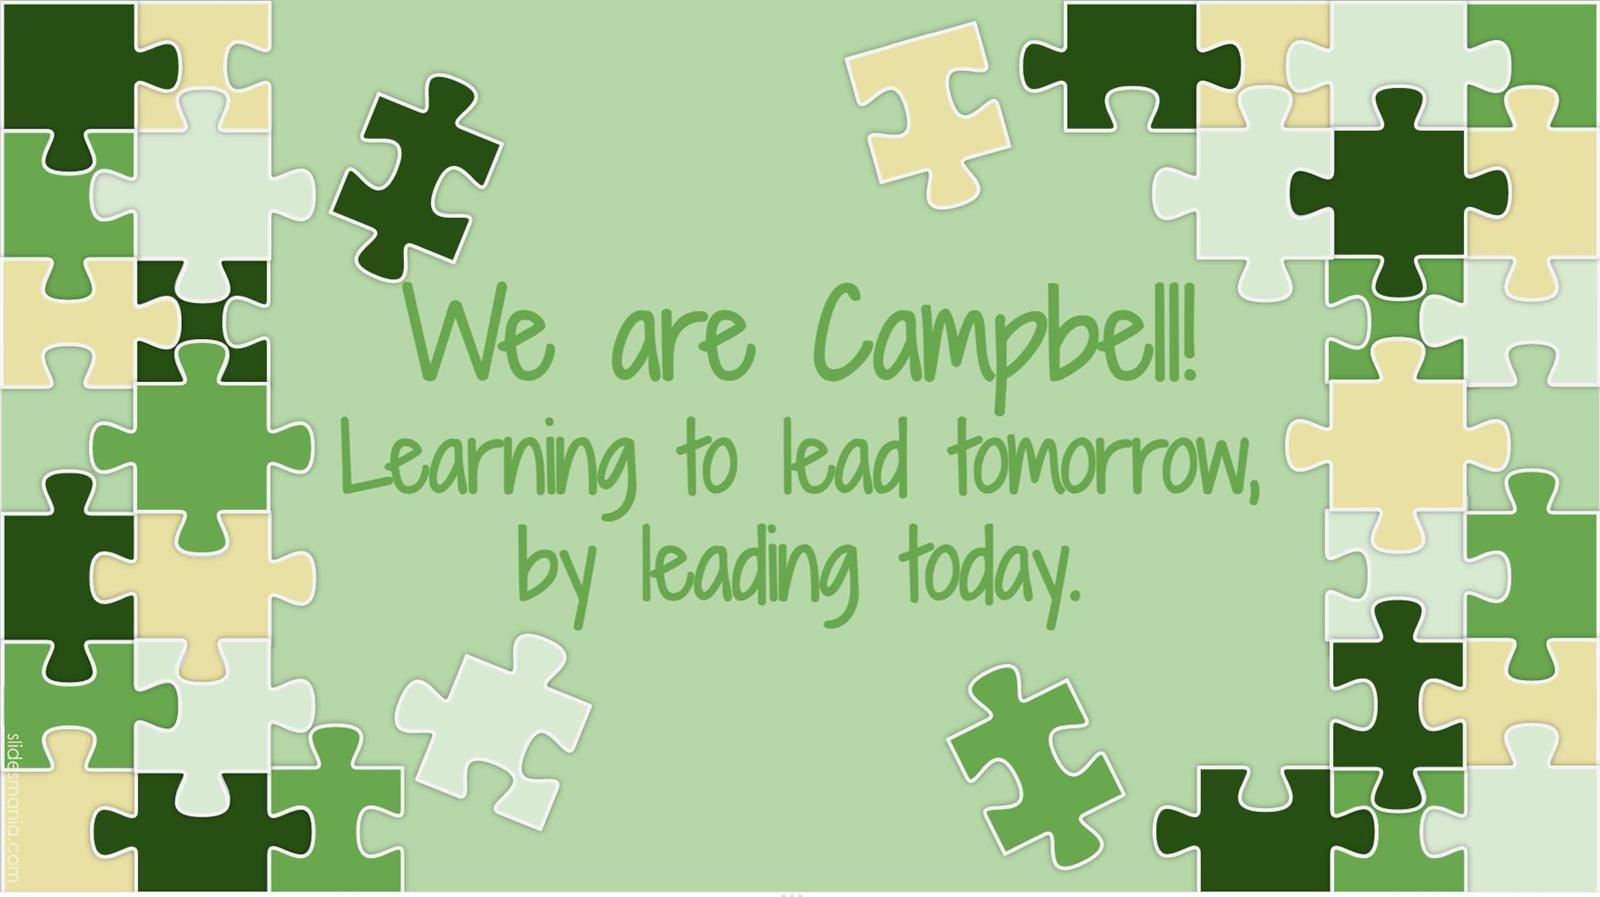 We are Campbell! Learning to lead tomorrow, by leading today